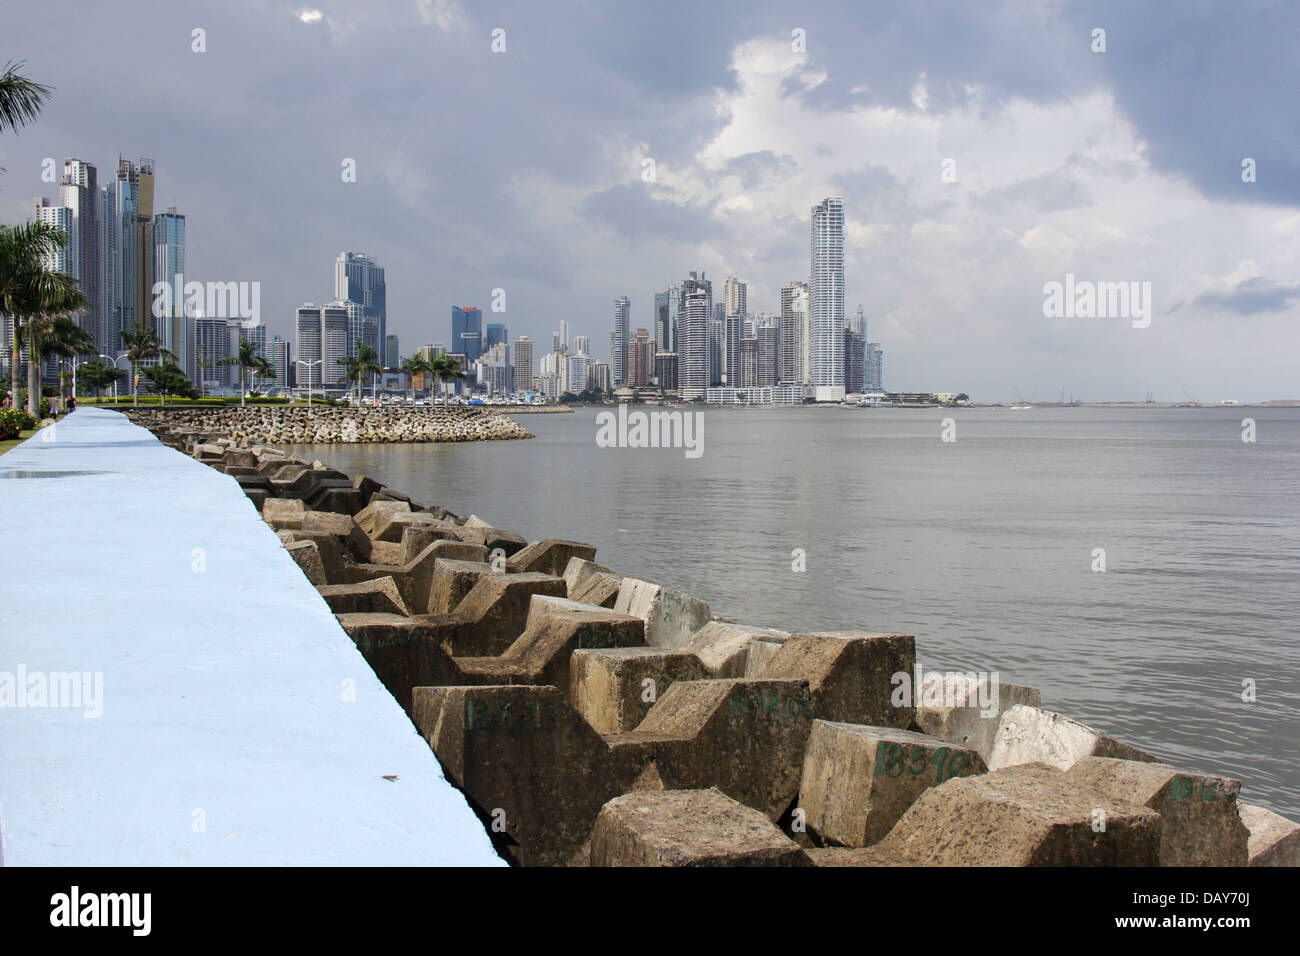 Jetty breakwater of the Cinta Costera of Panama City, with skyscrapers of the modern skyline in the background and the bay. Stock Photo